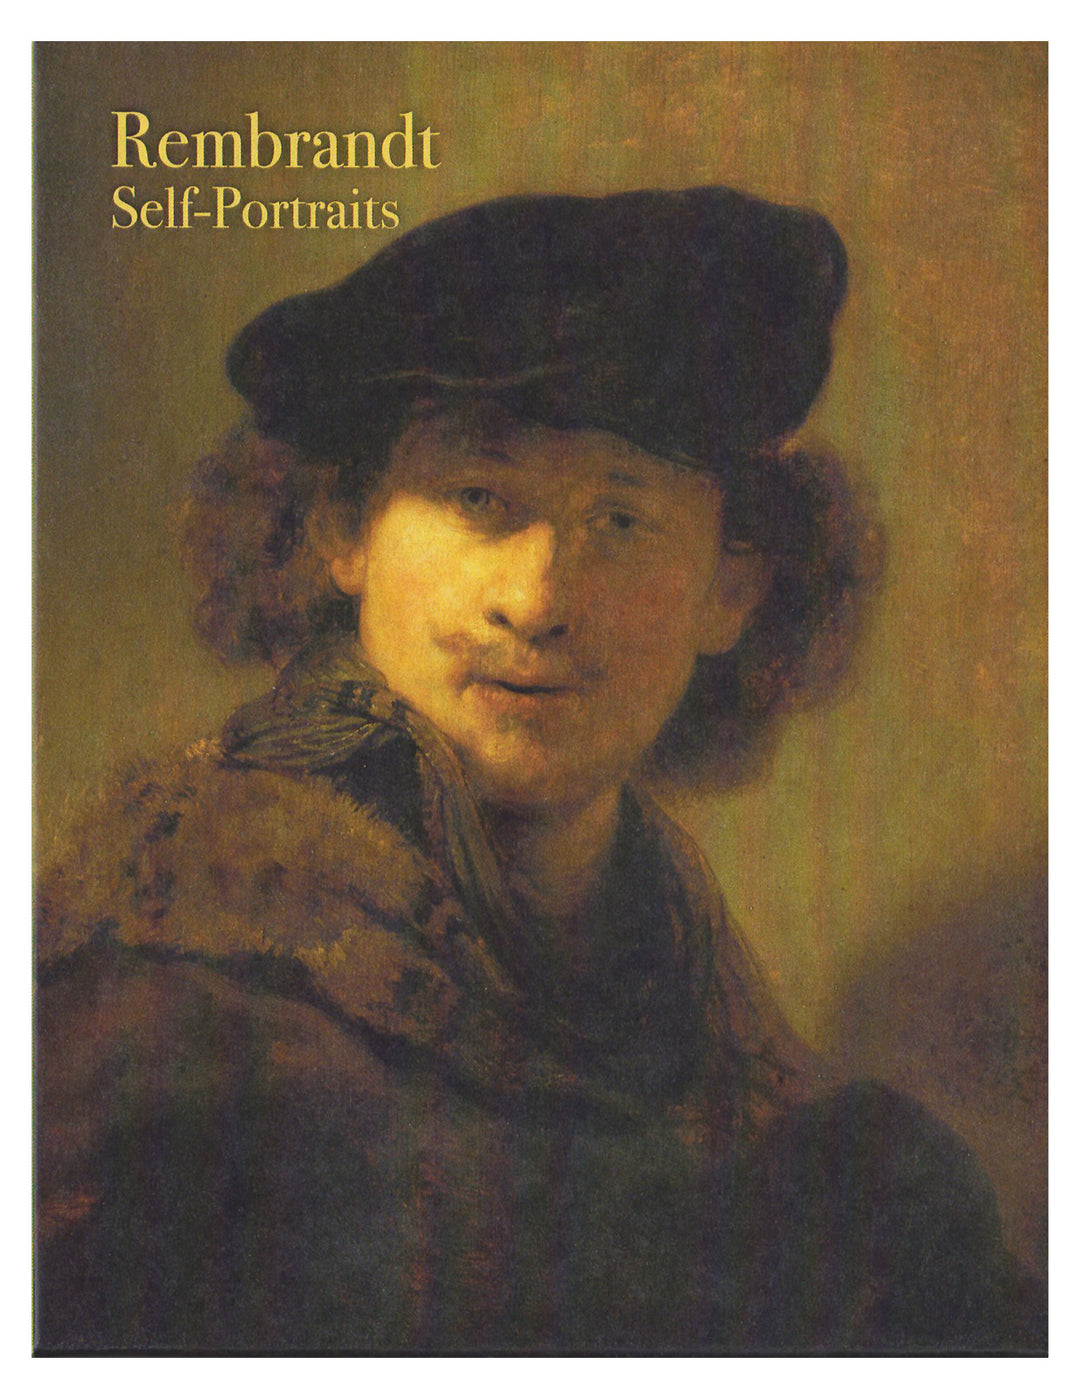 Rembrandt Self-Portraits Note Cards Boxed Set of 12 with Envelopes